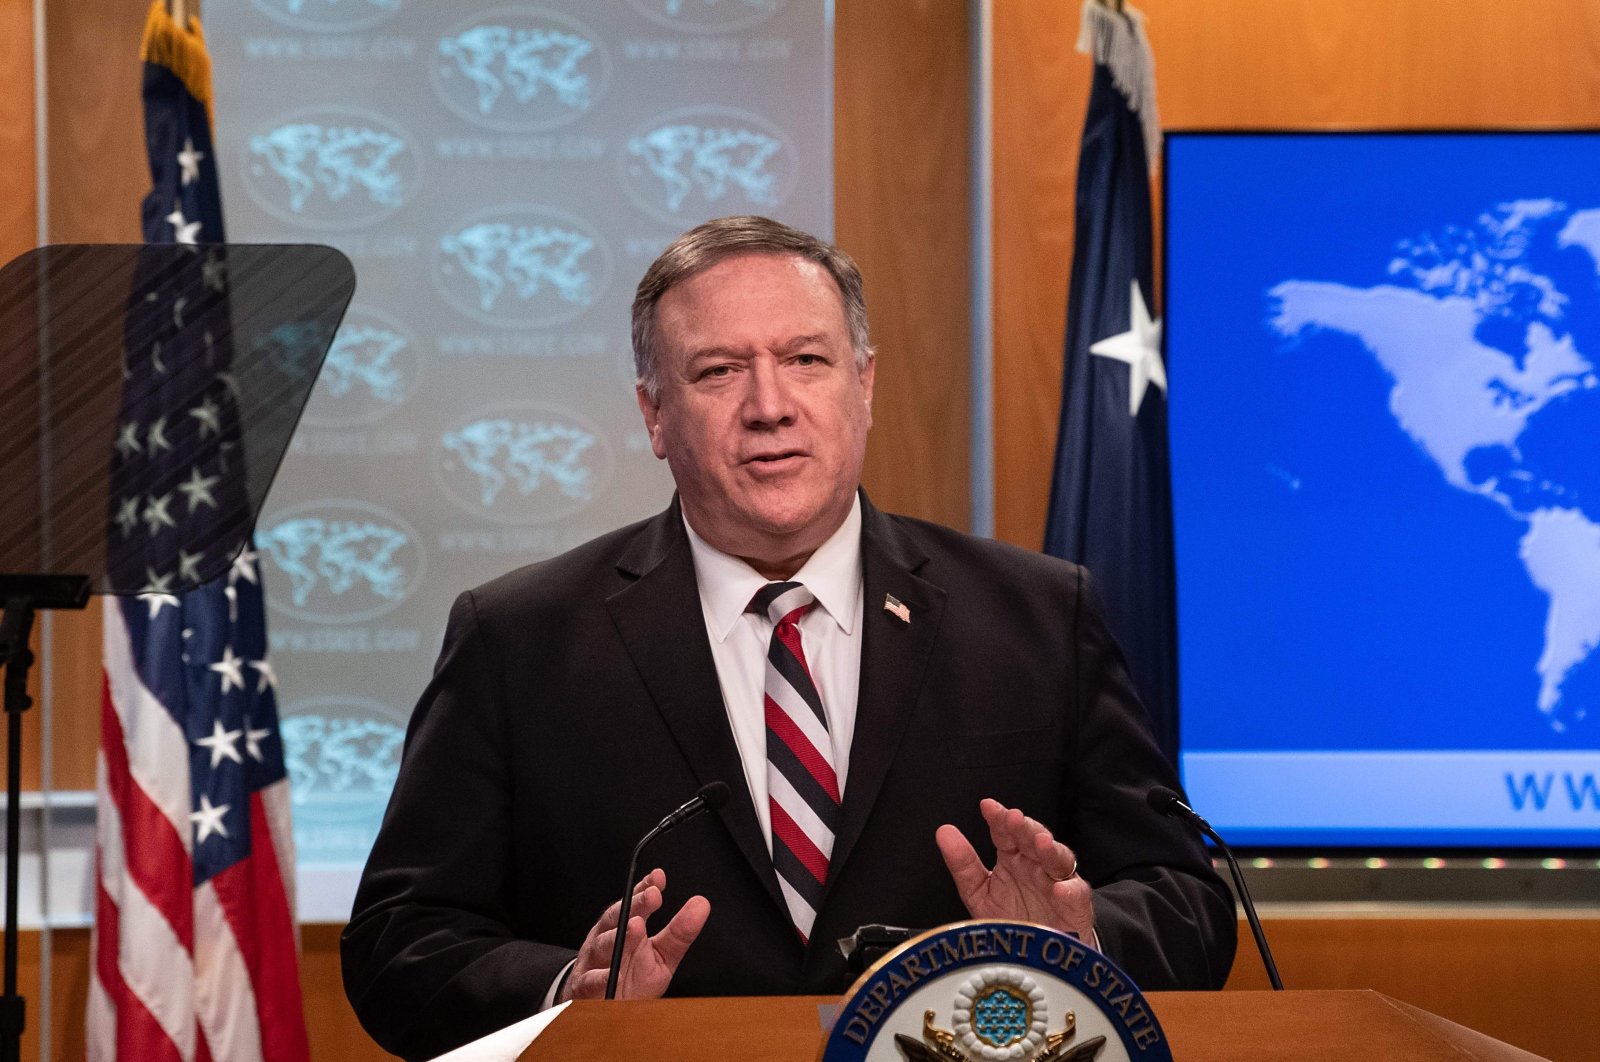 U.S. Secretary of State Mike Pompeo speaks at a press conference at the State Department in Washington, Mar. 17, 2020. (AFP Photo)